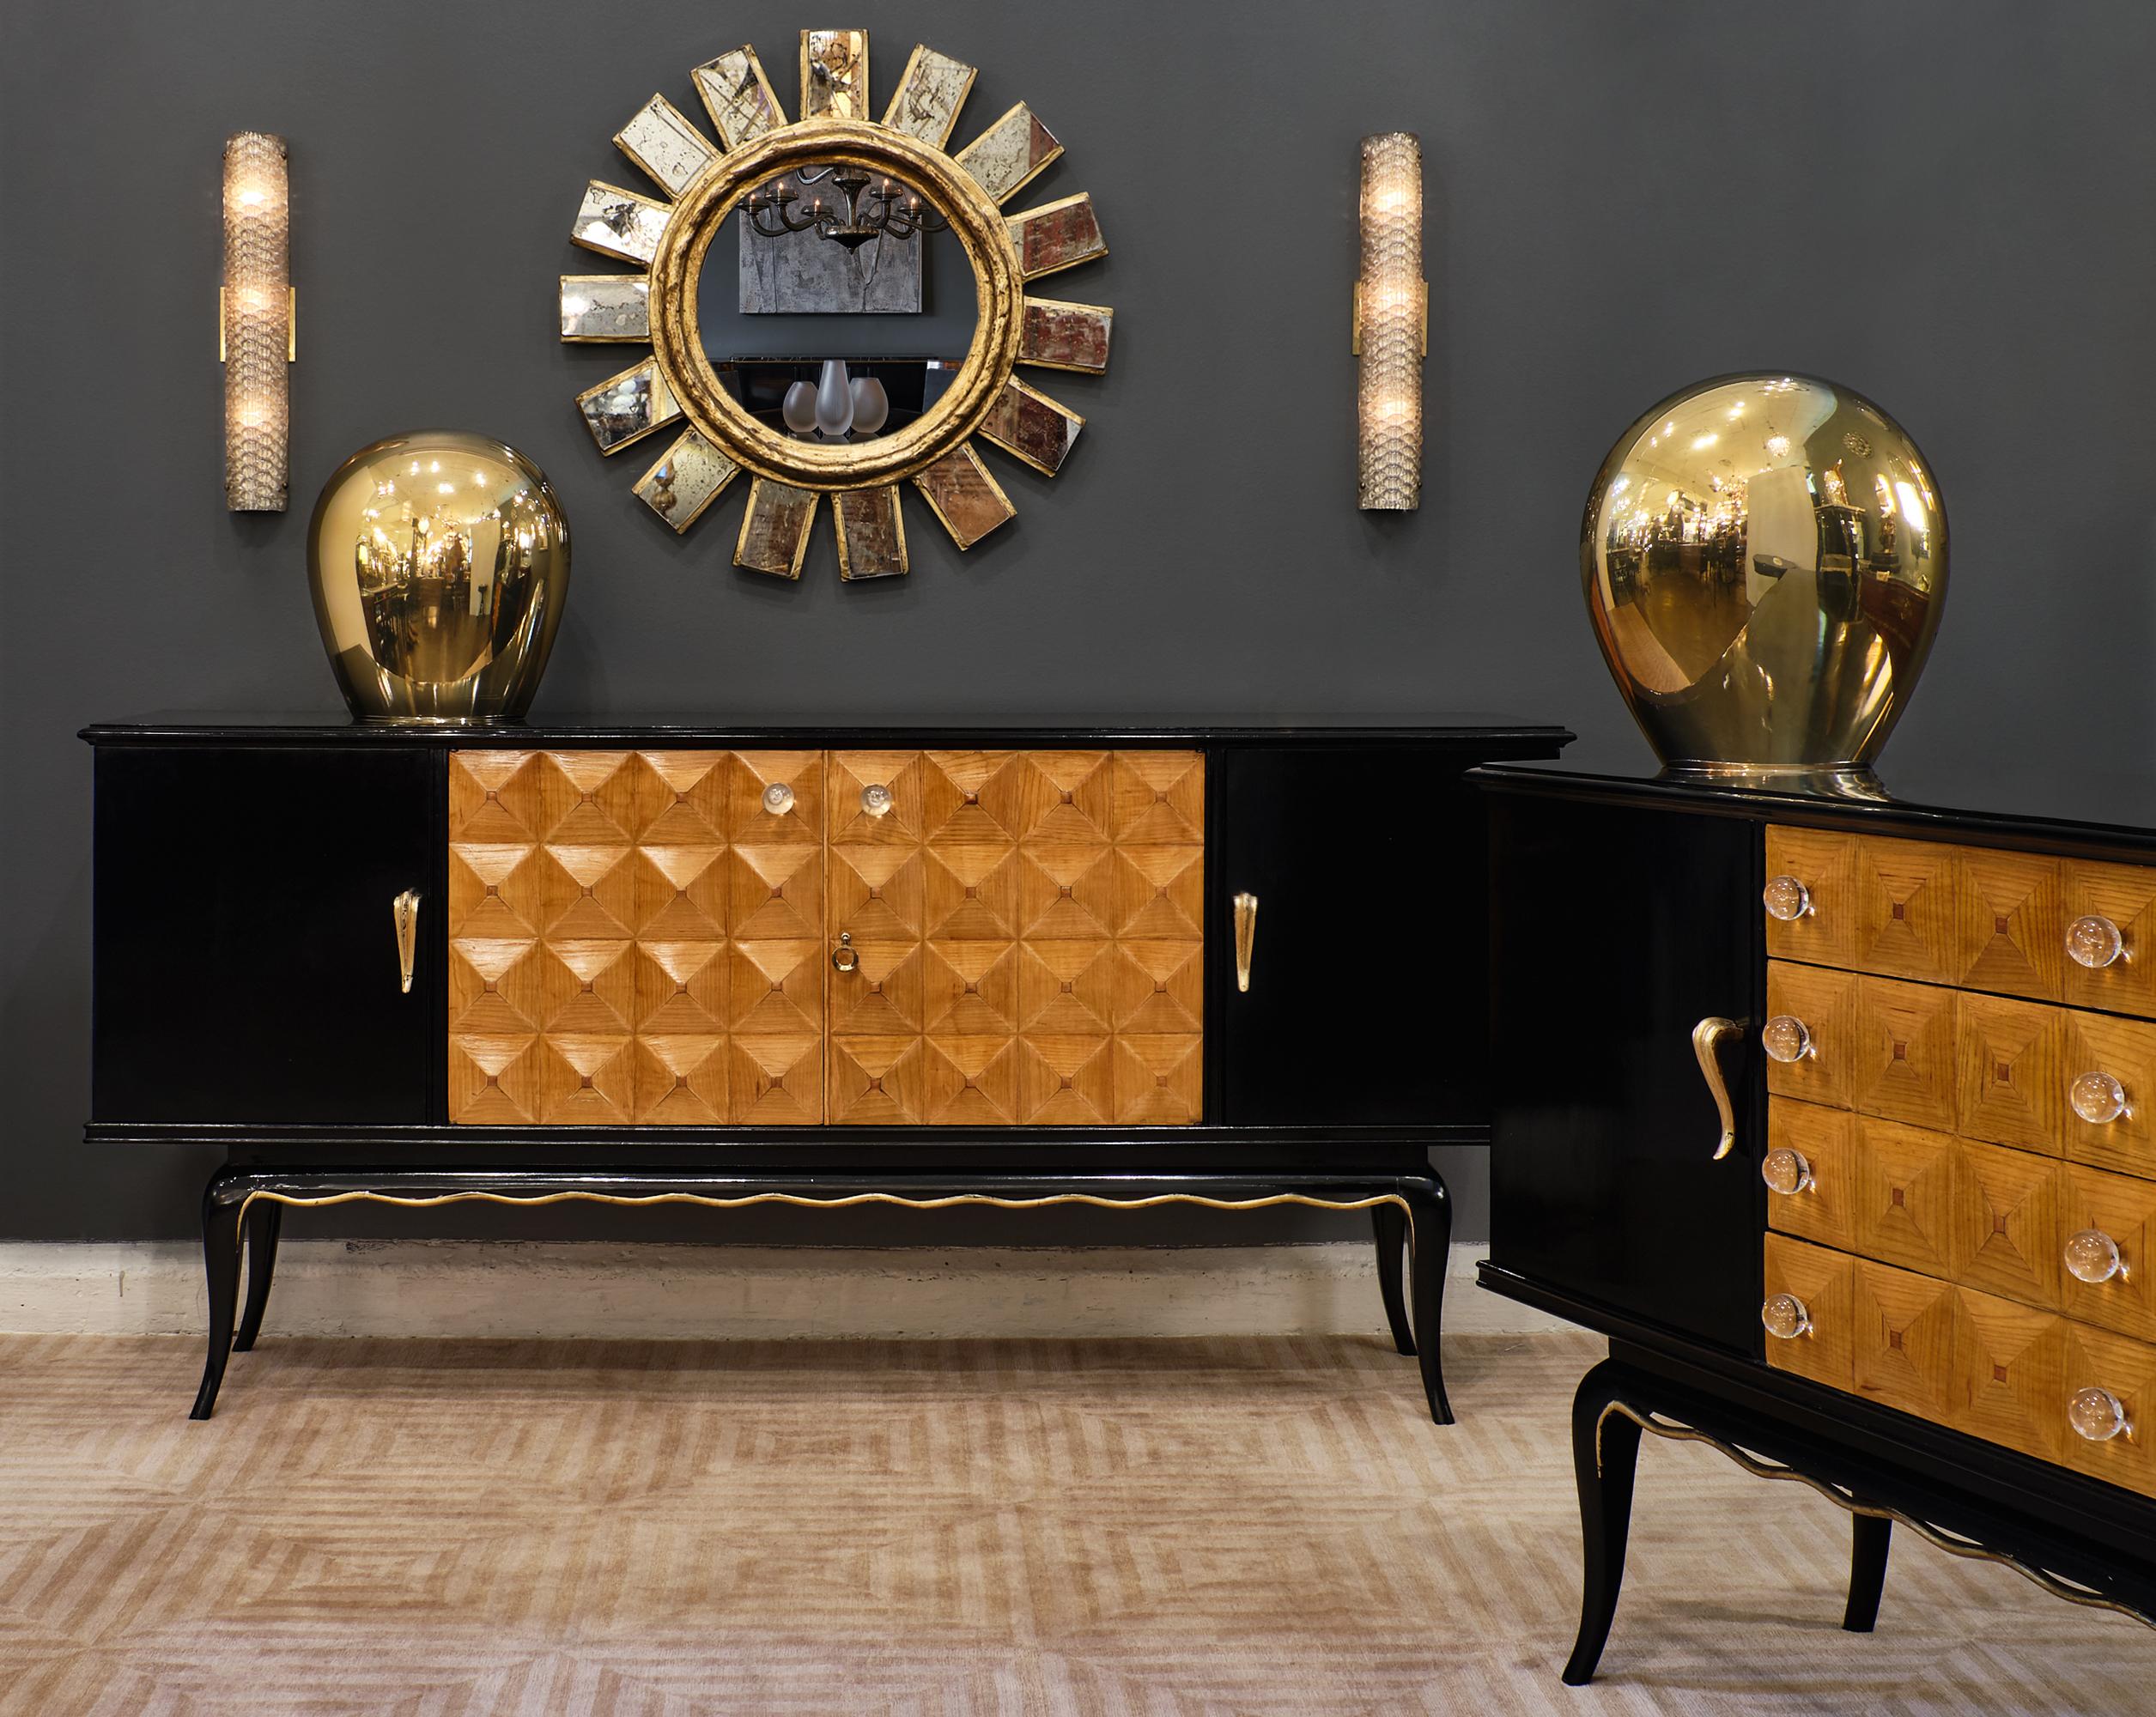 Italian midcentury Paolo Buffa style credenza with an ebonized body and drawers adorned with a beautiful ash veneer in a diamond pattern. The texture gives them such elegant visual appeal and the knobs are hand blown Murano glass. The handles on the